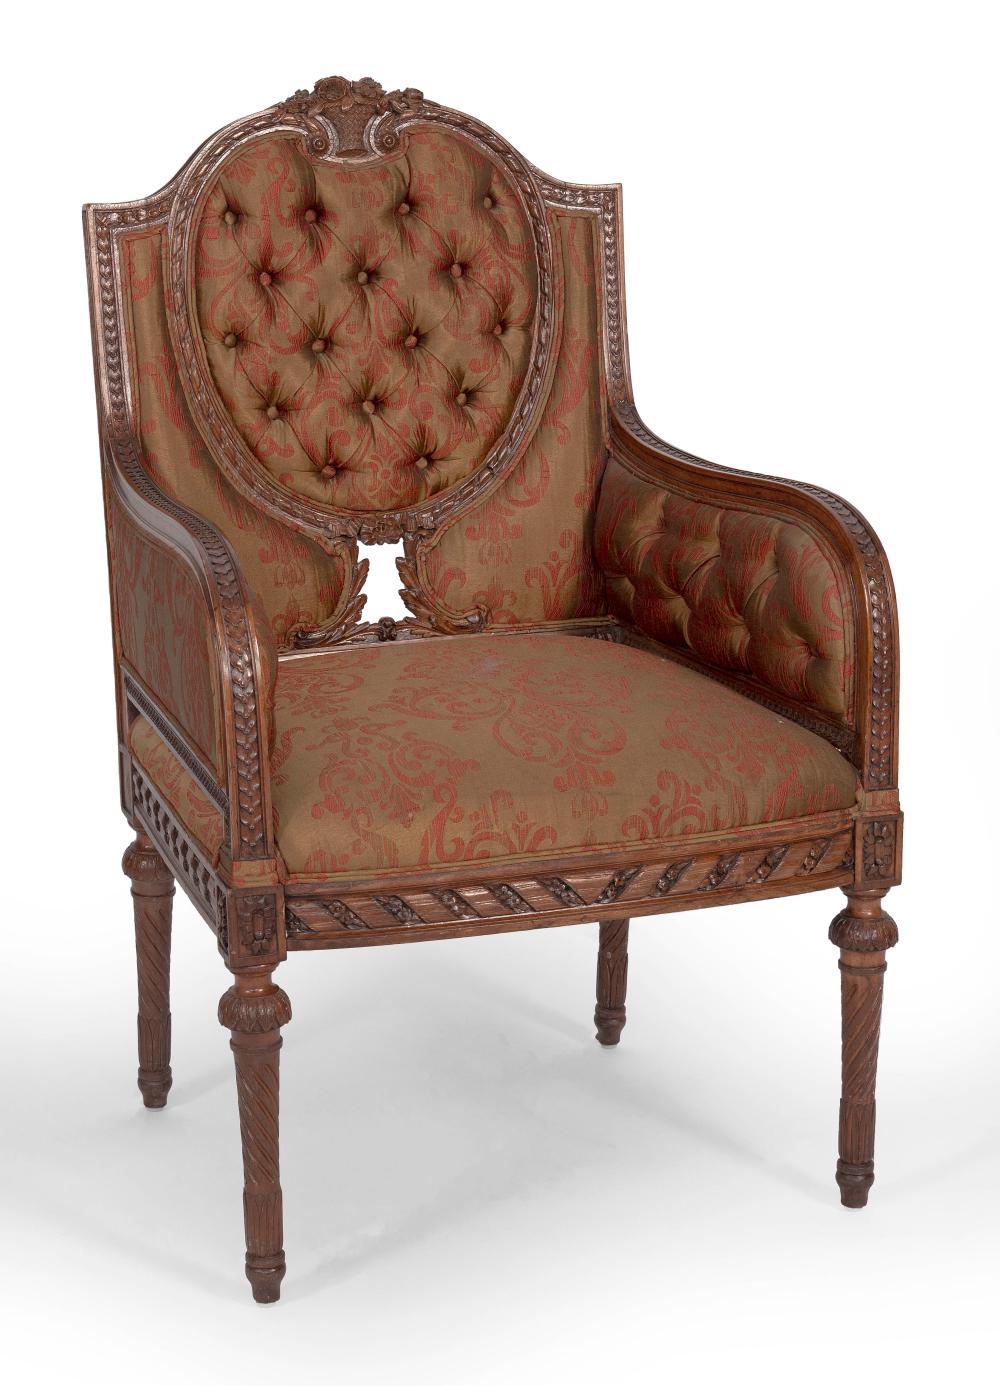 ARMCHAIR, POSSIBLY HERTER BROTHERS NEW